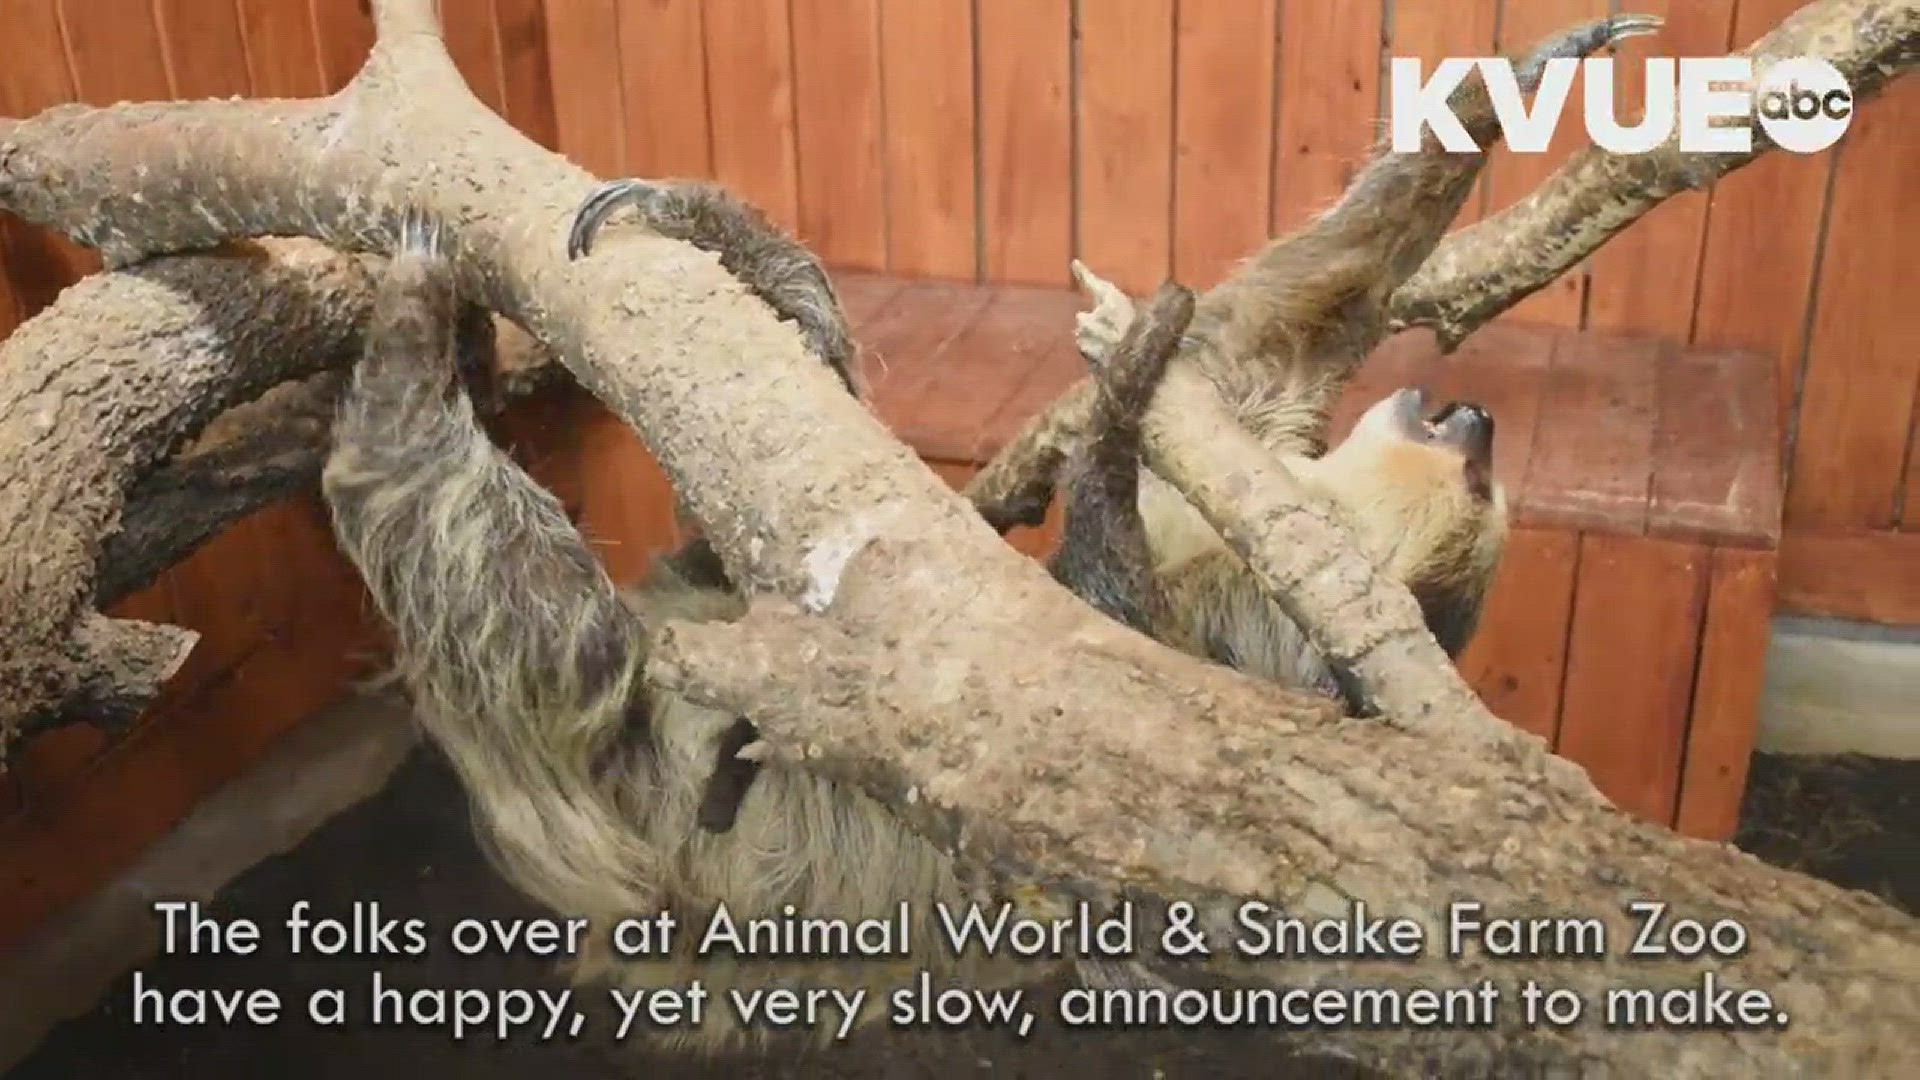 A baby sloth naturally bred in captivity was born on Nov. 17 at the Animal World & Snake Farm Zoo in New Braunfels.